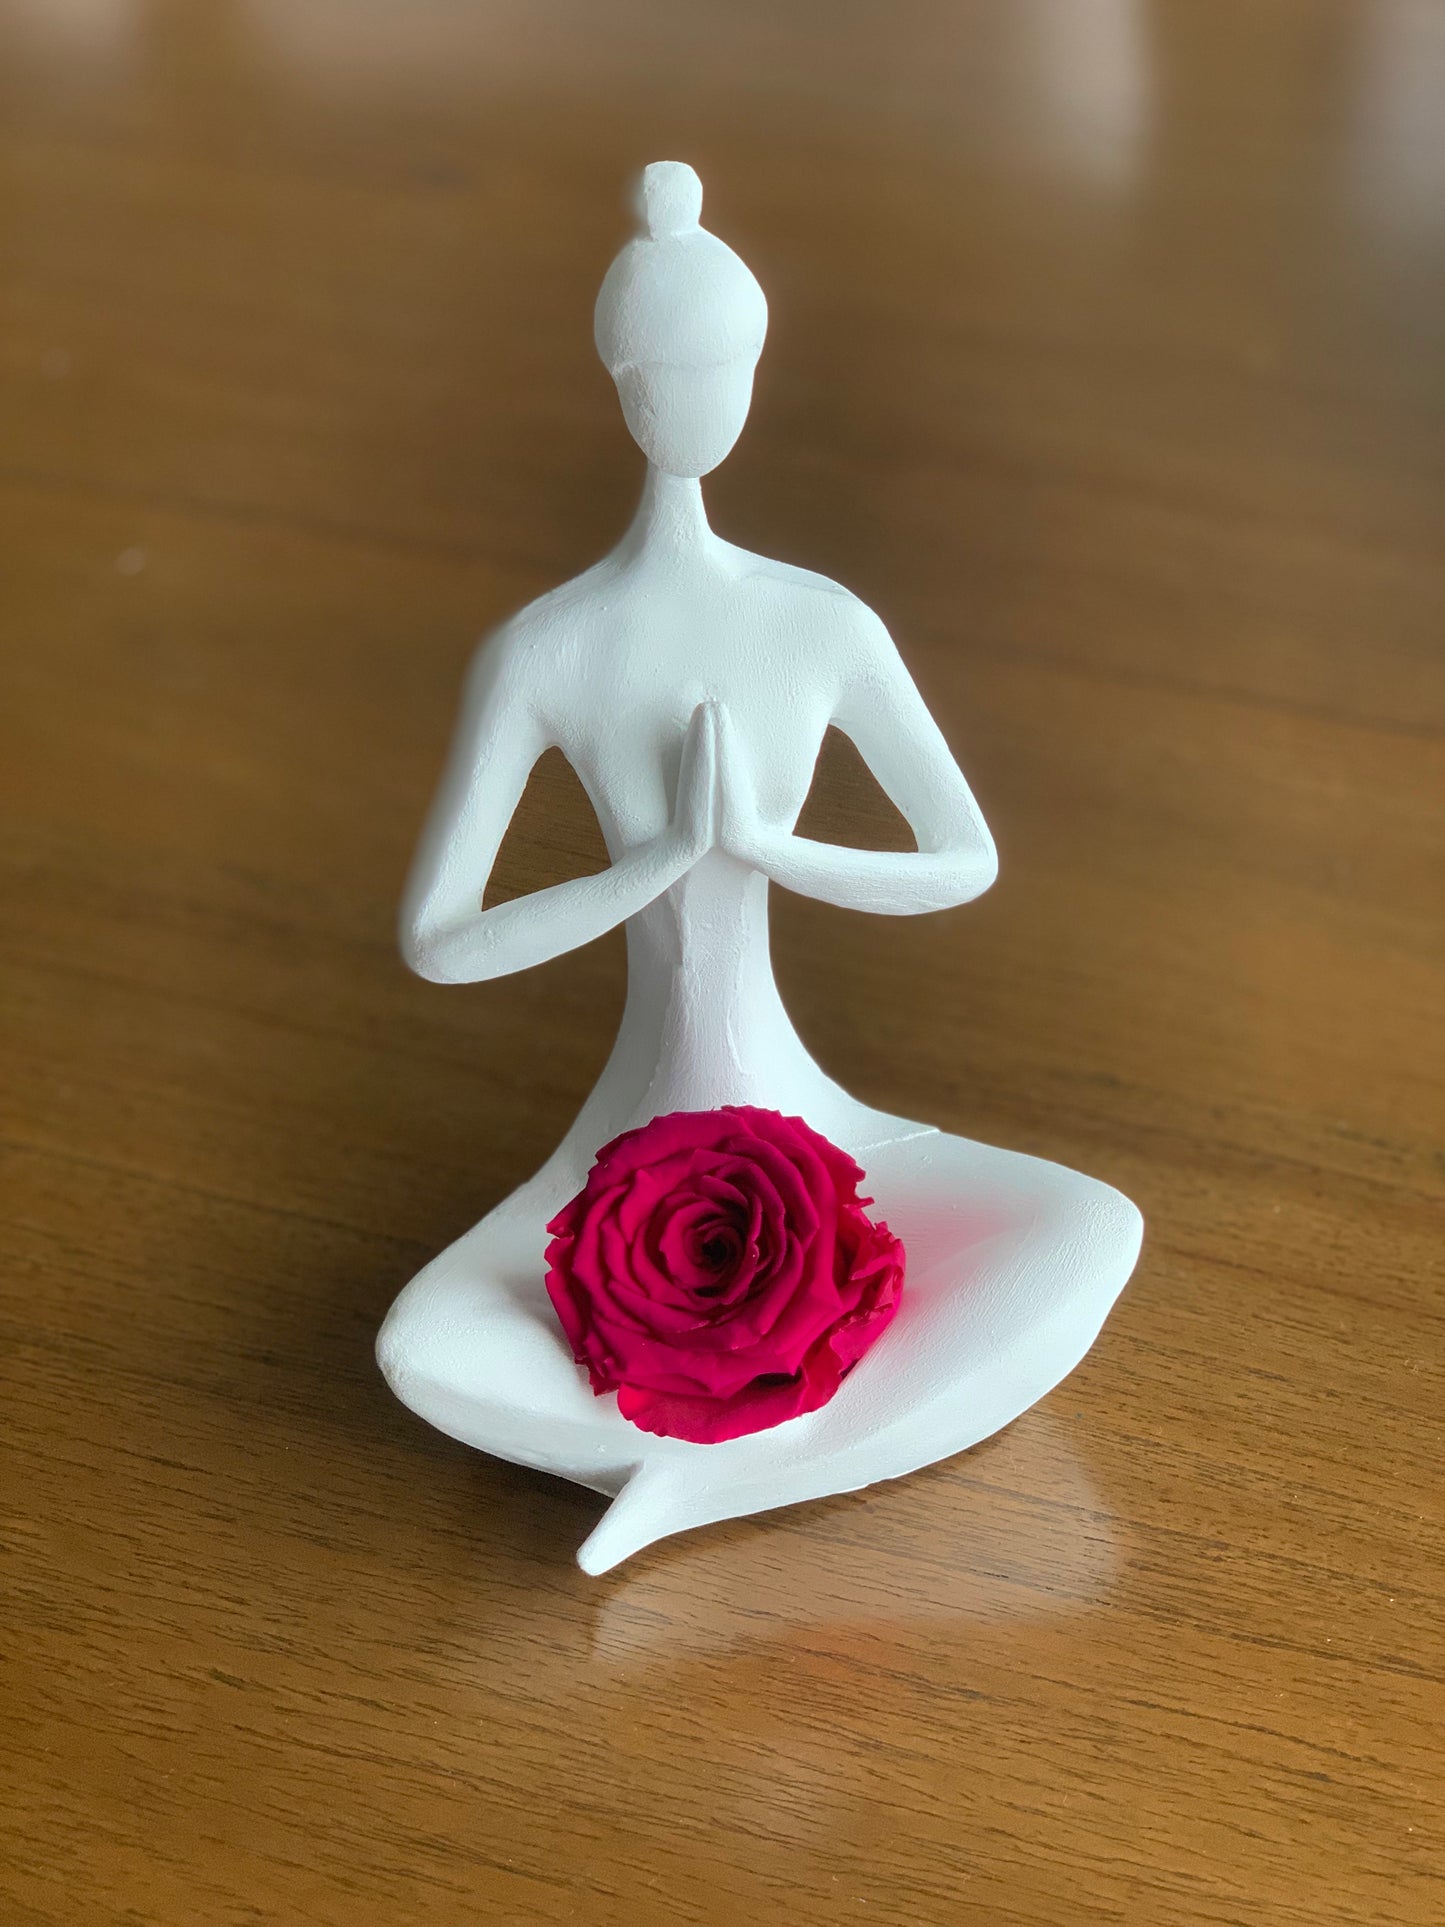 Handmade Stylized Woman in Meditation Yoga Pose Tea Light Holder in various colors, symbolizing female empowerment and divine femininity